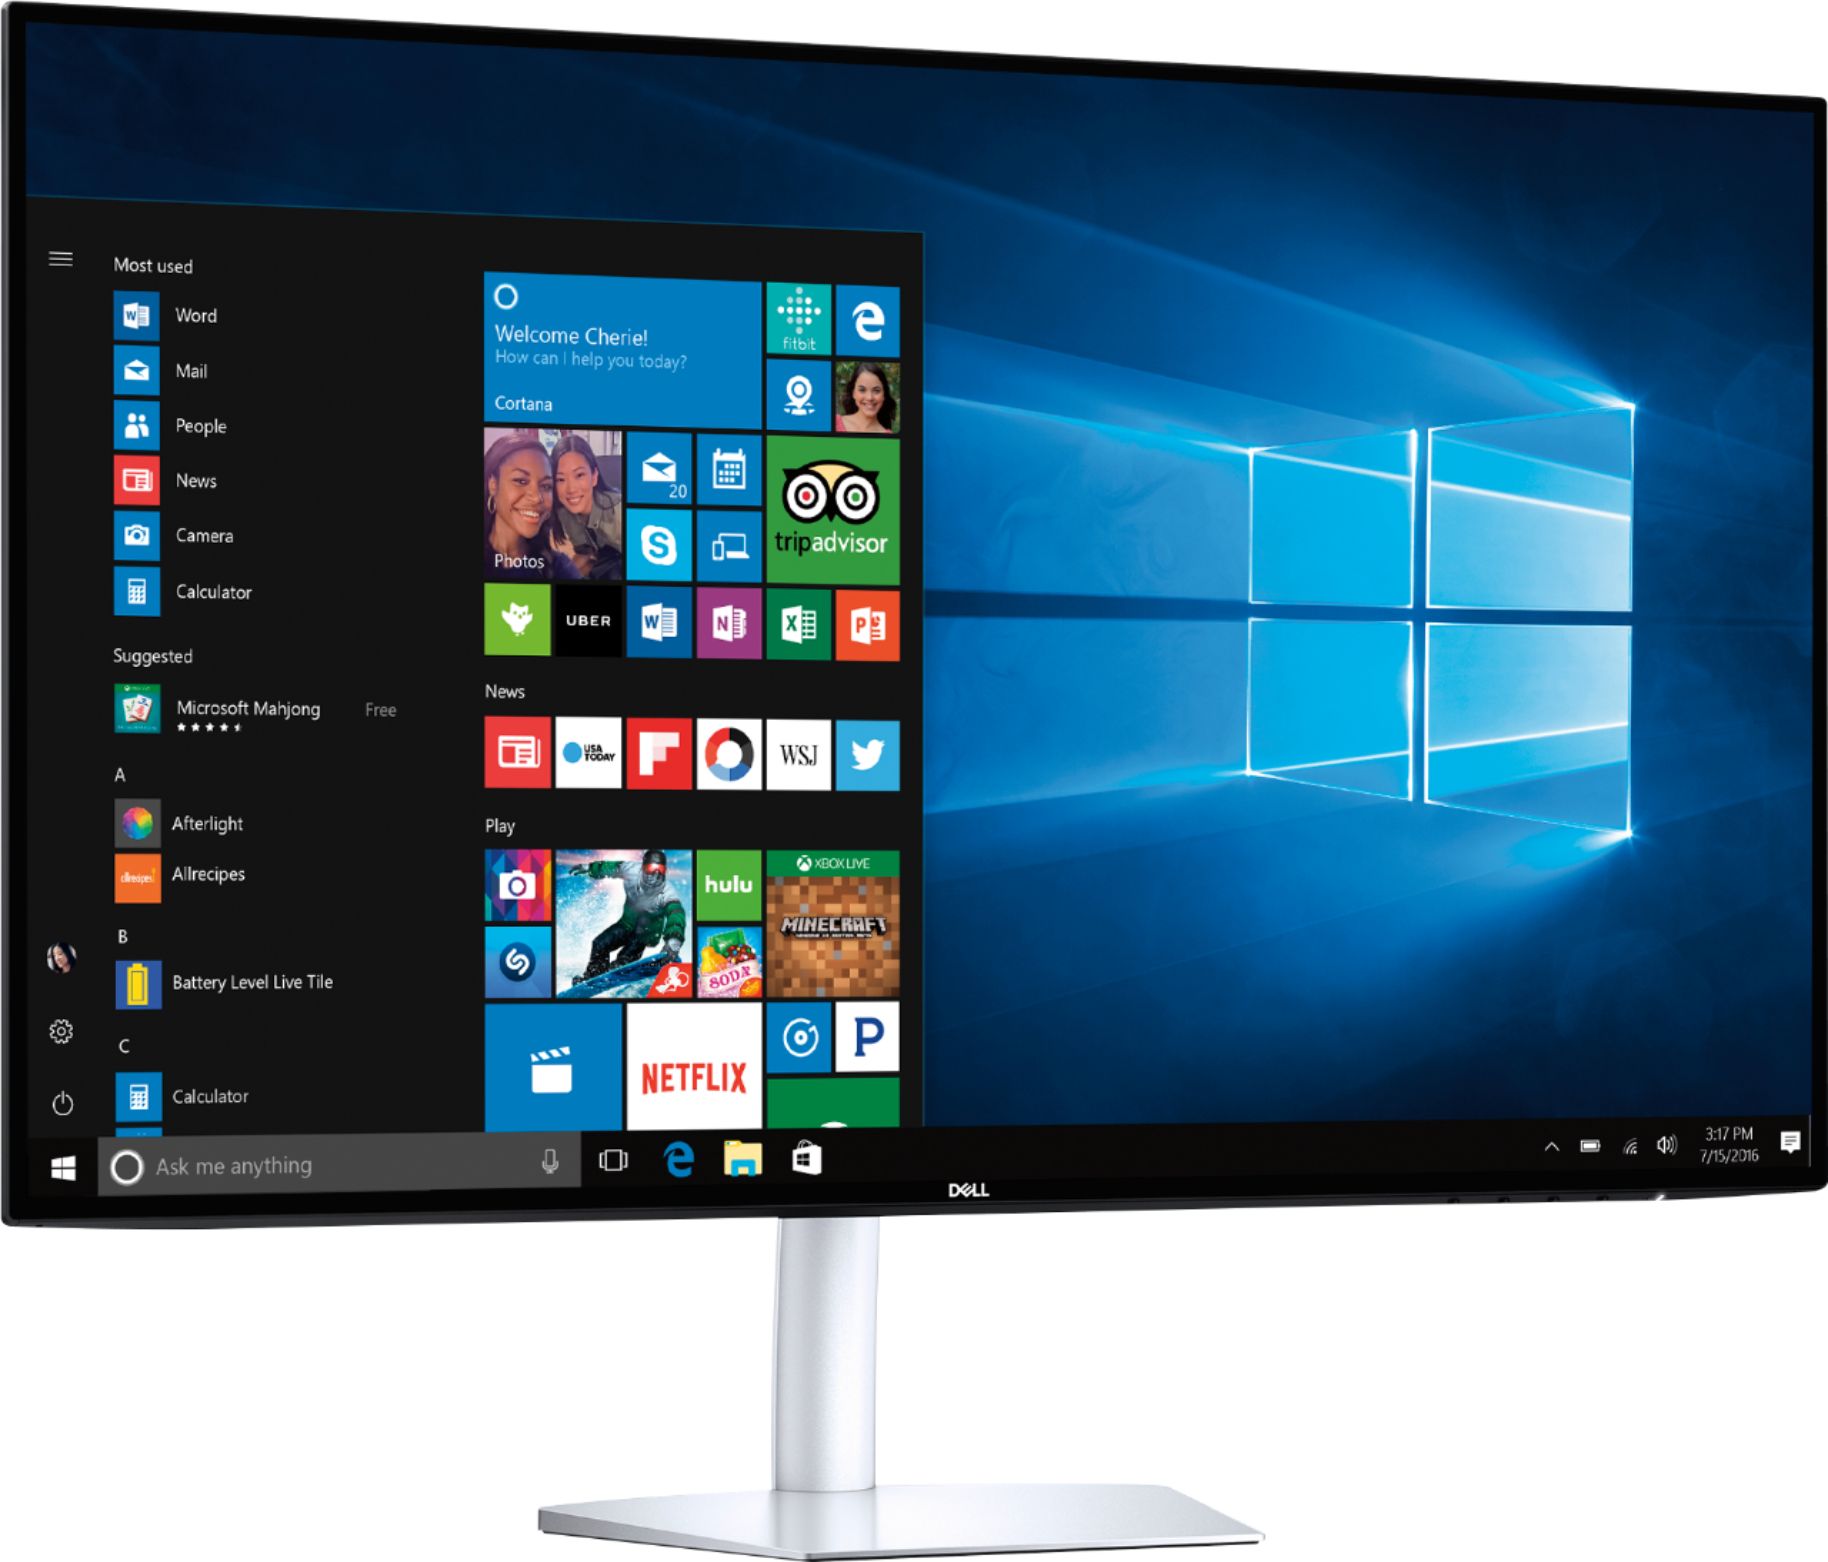 Angle View: Dell - 27" IPS LED QHD Monitor with HDR (HDMI)